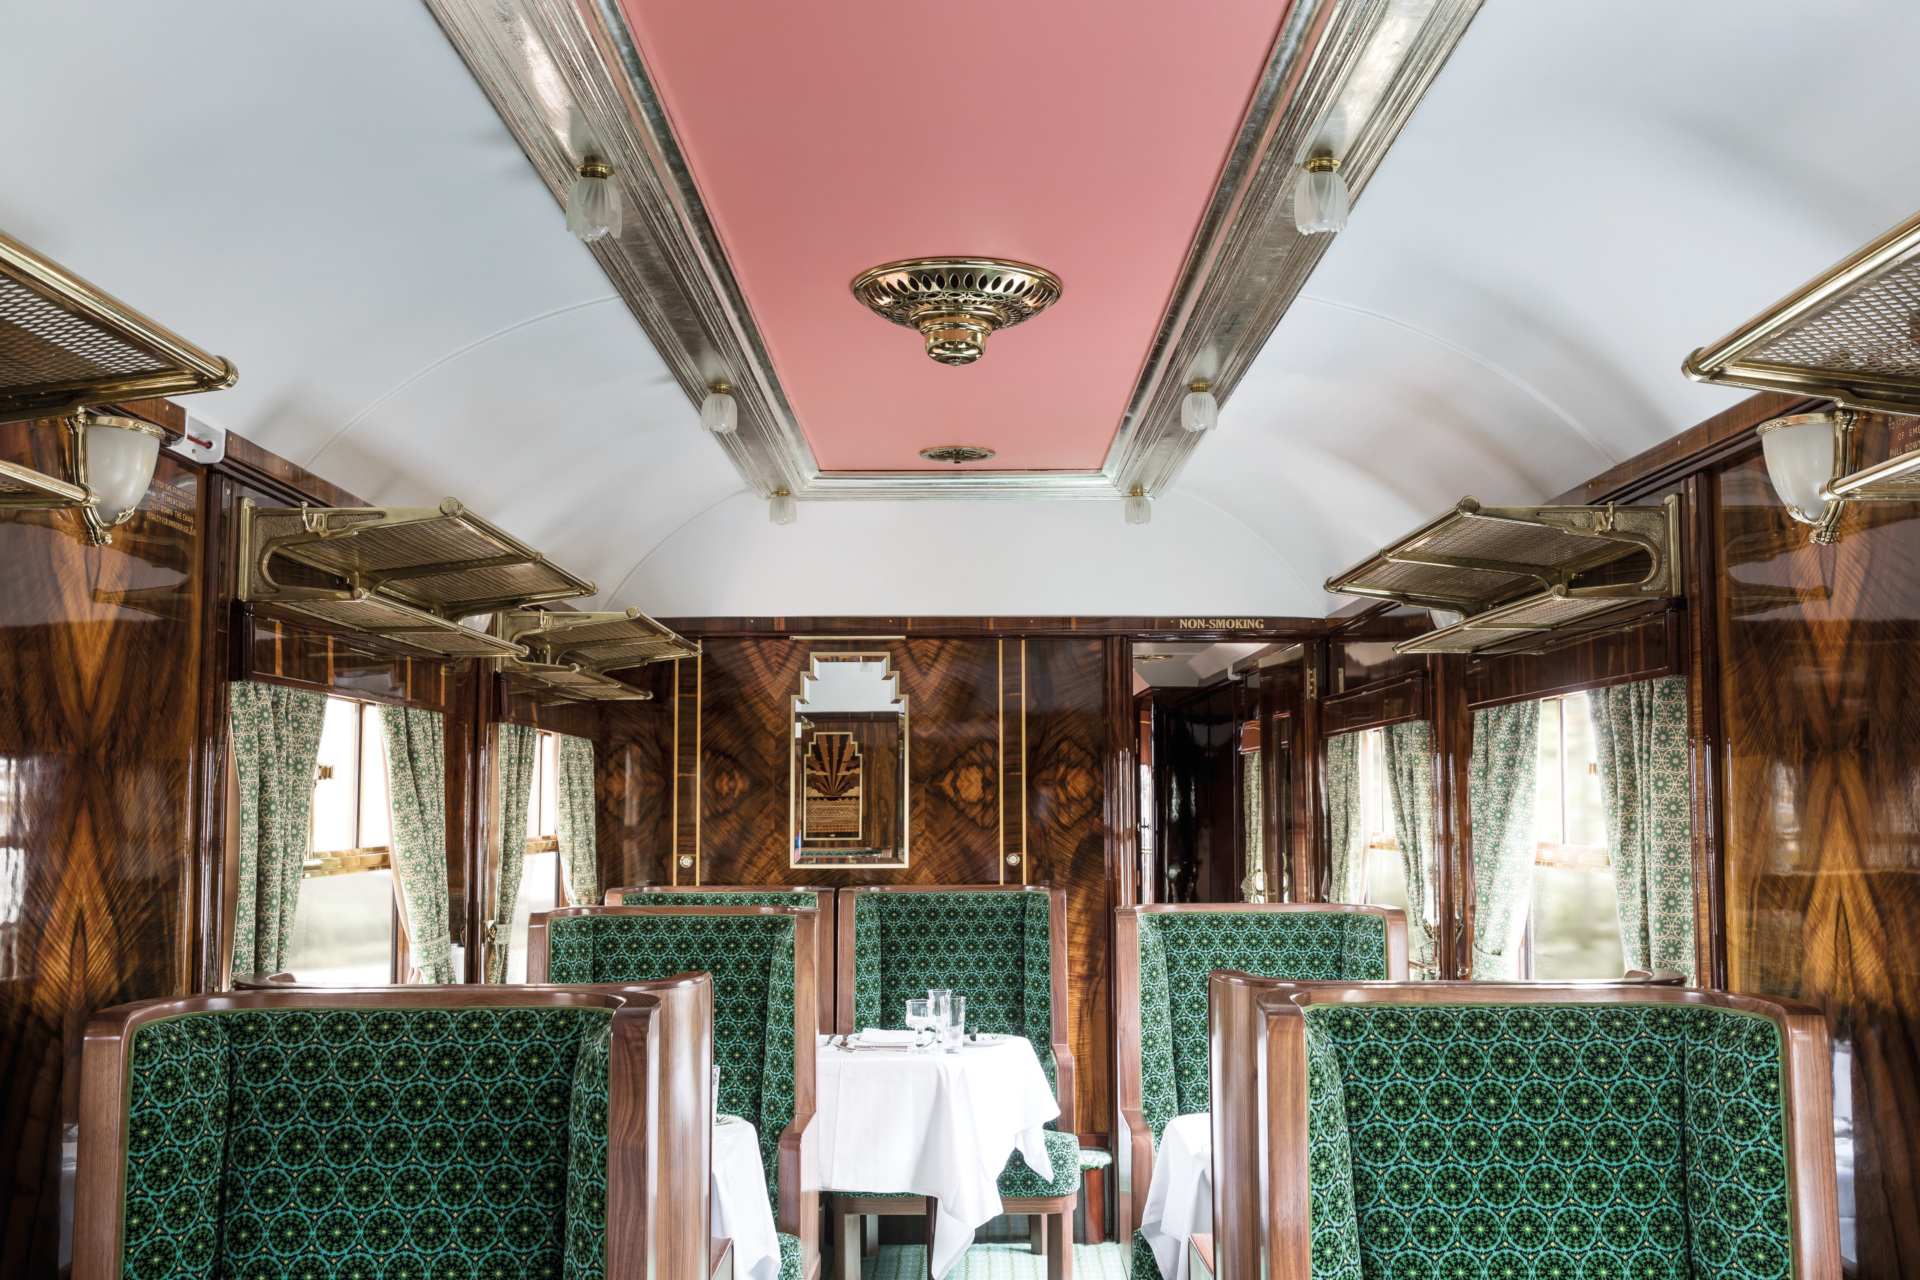 Train carriage with green seats and pink ceiling